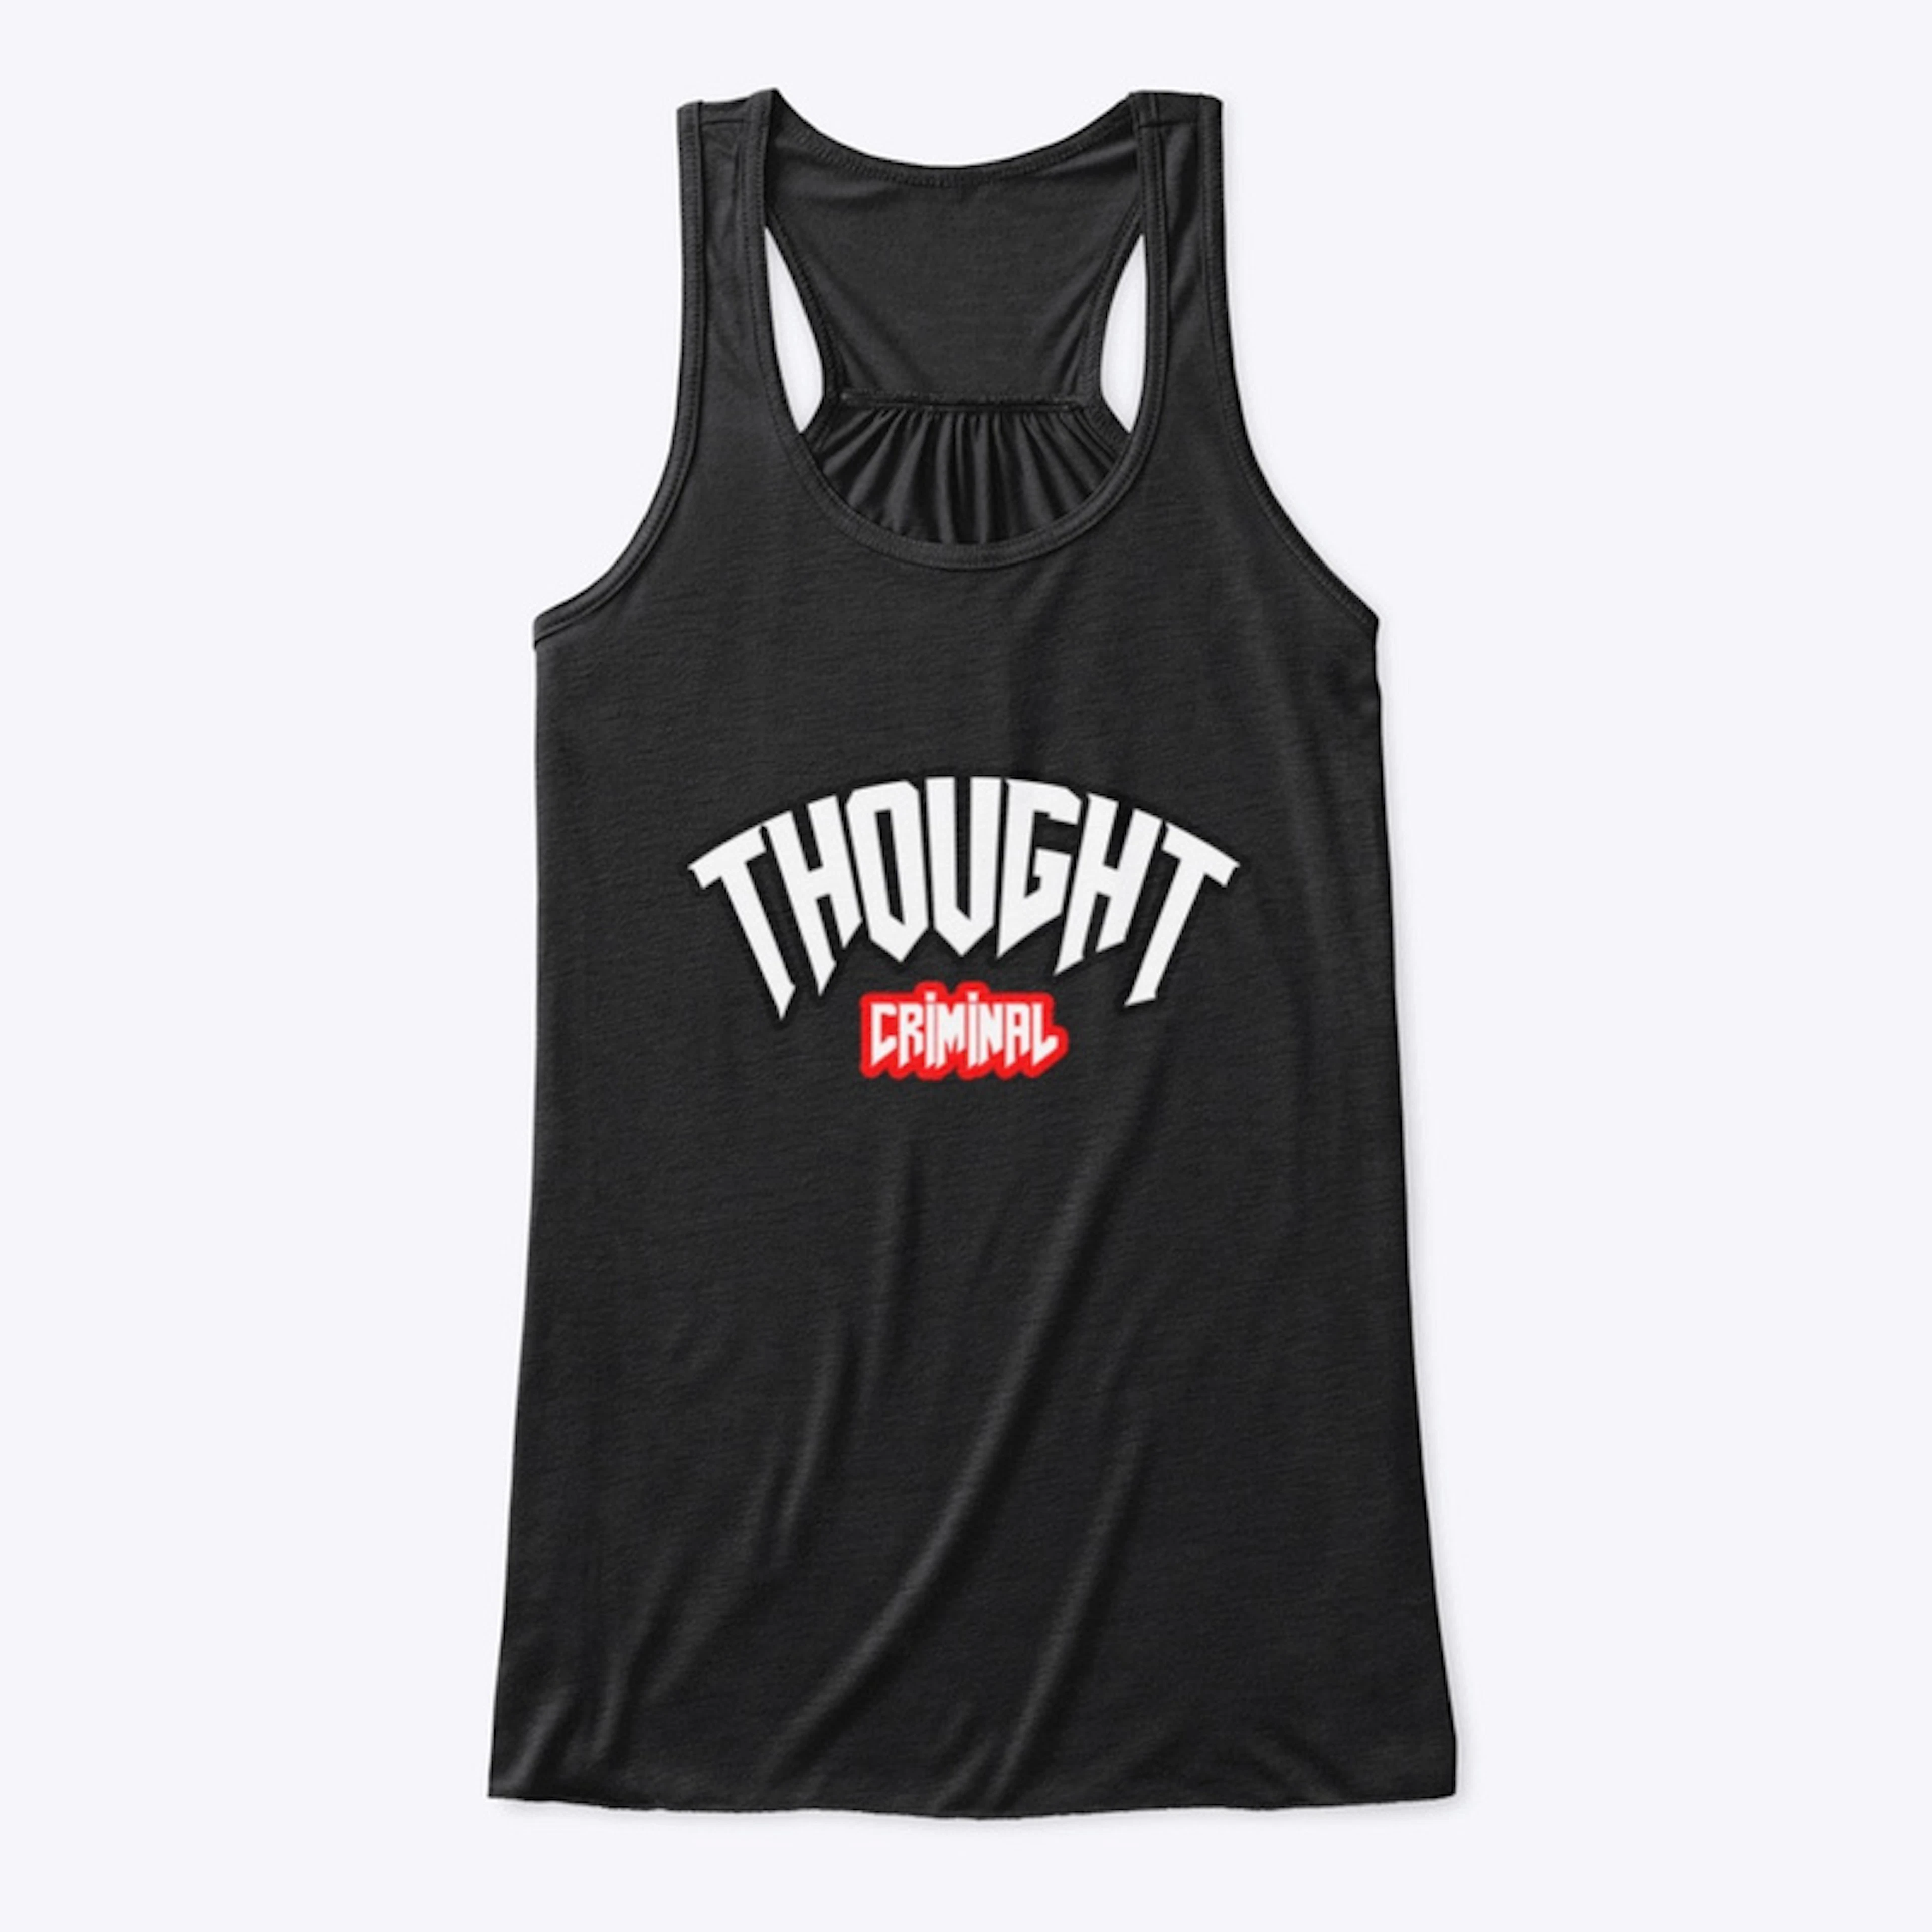 THOUGHT CRIMINAL MERCH LINE